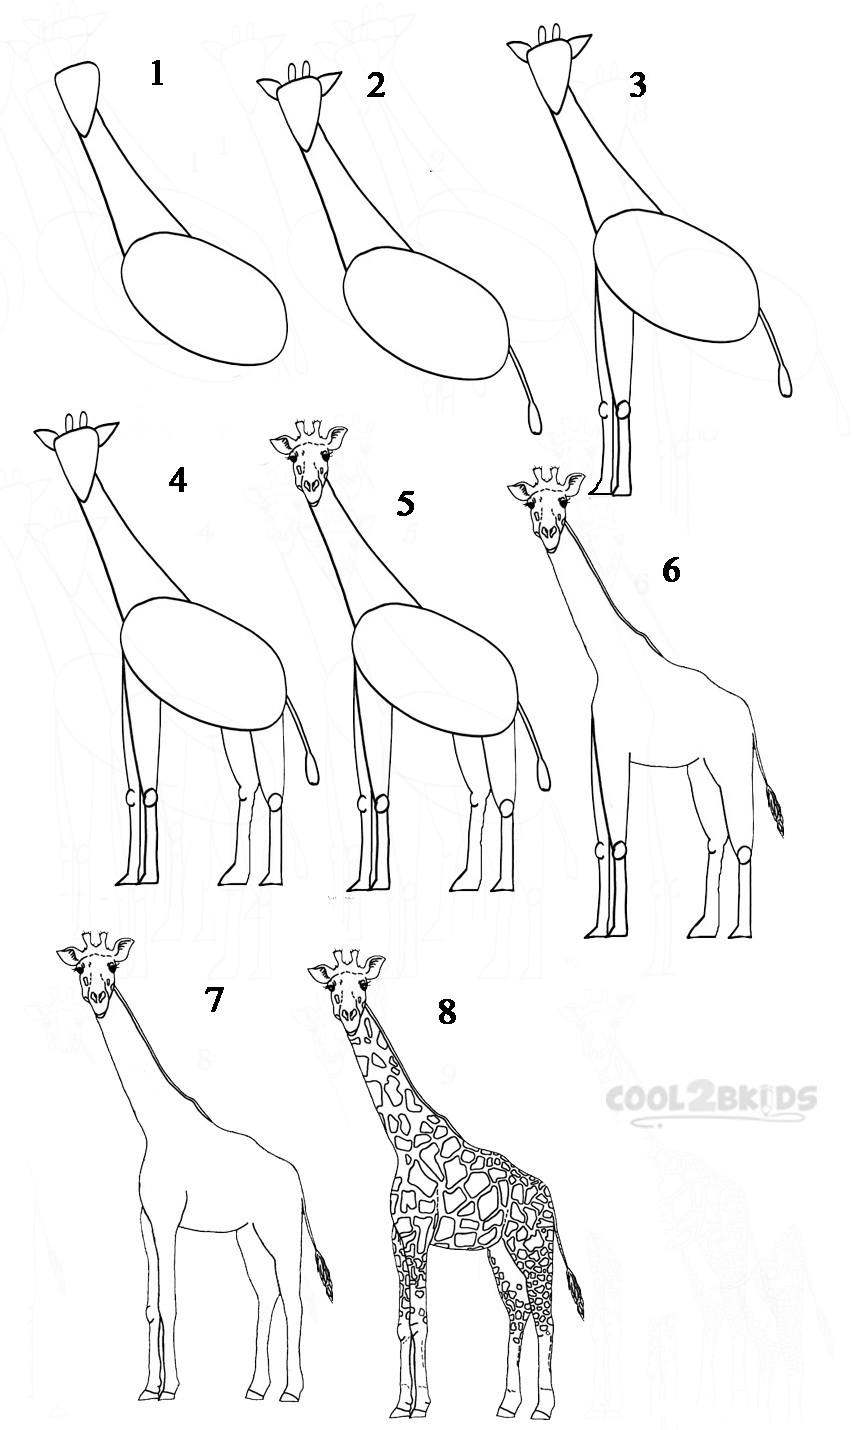 How To Draw a Giraffe (Step by Step Pictures)